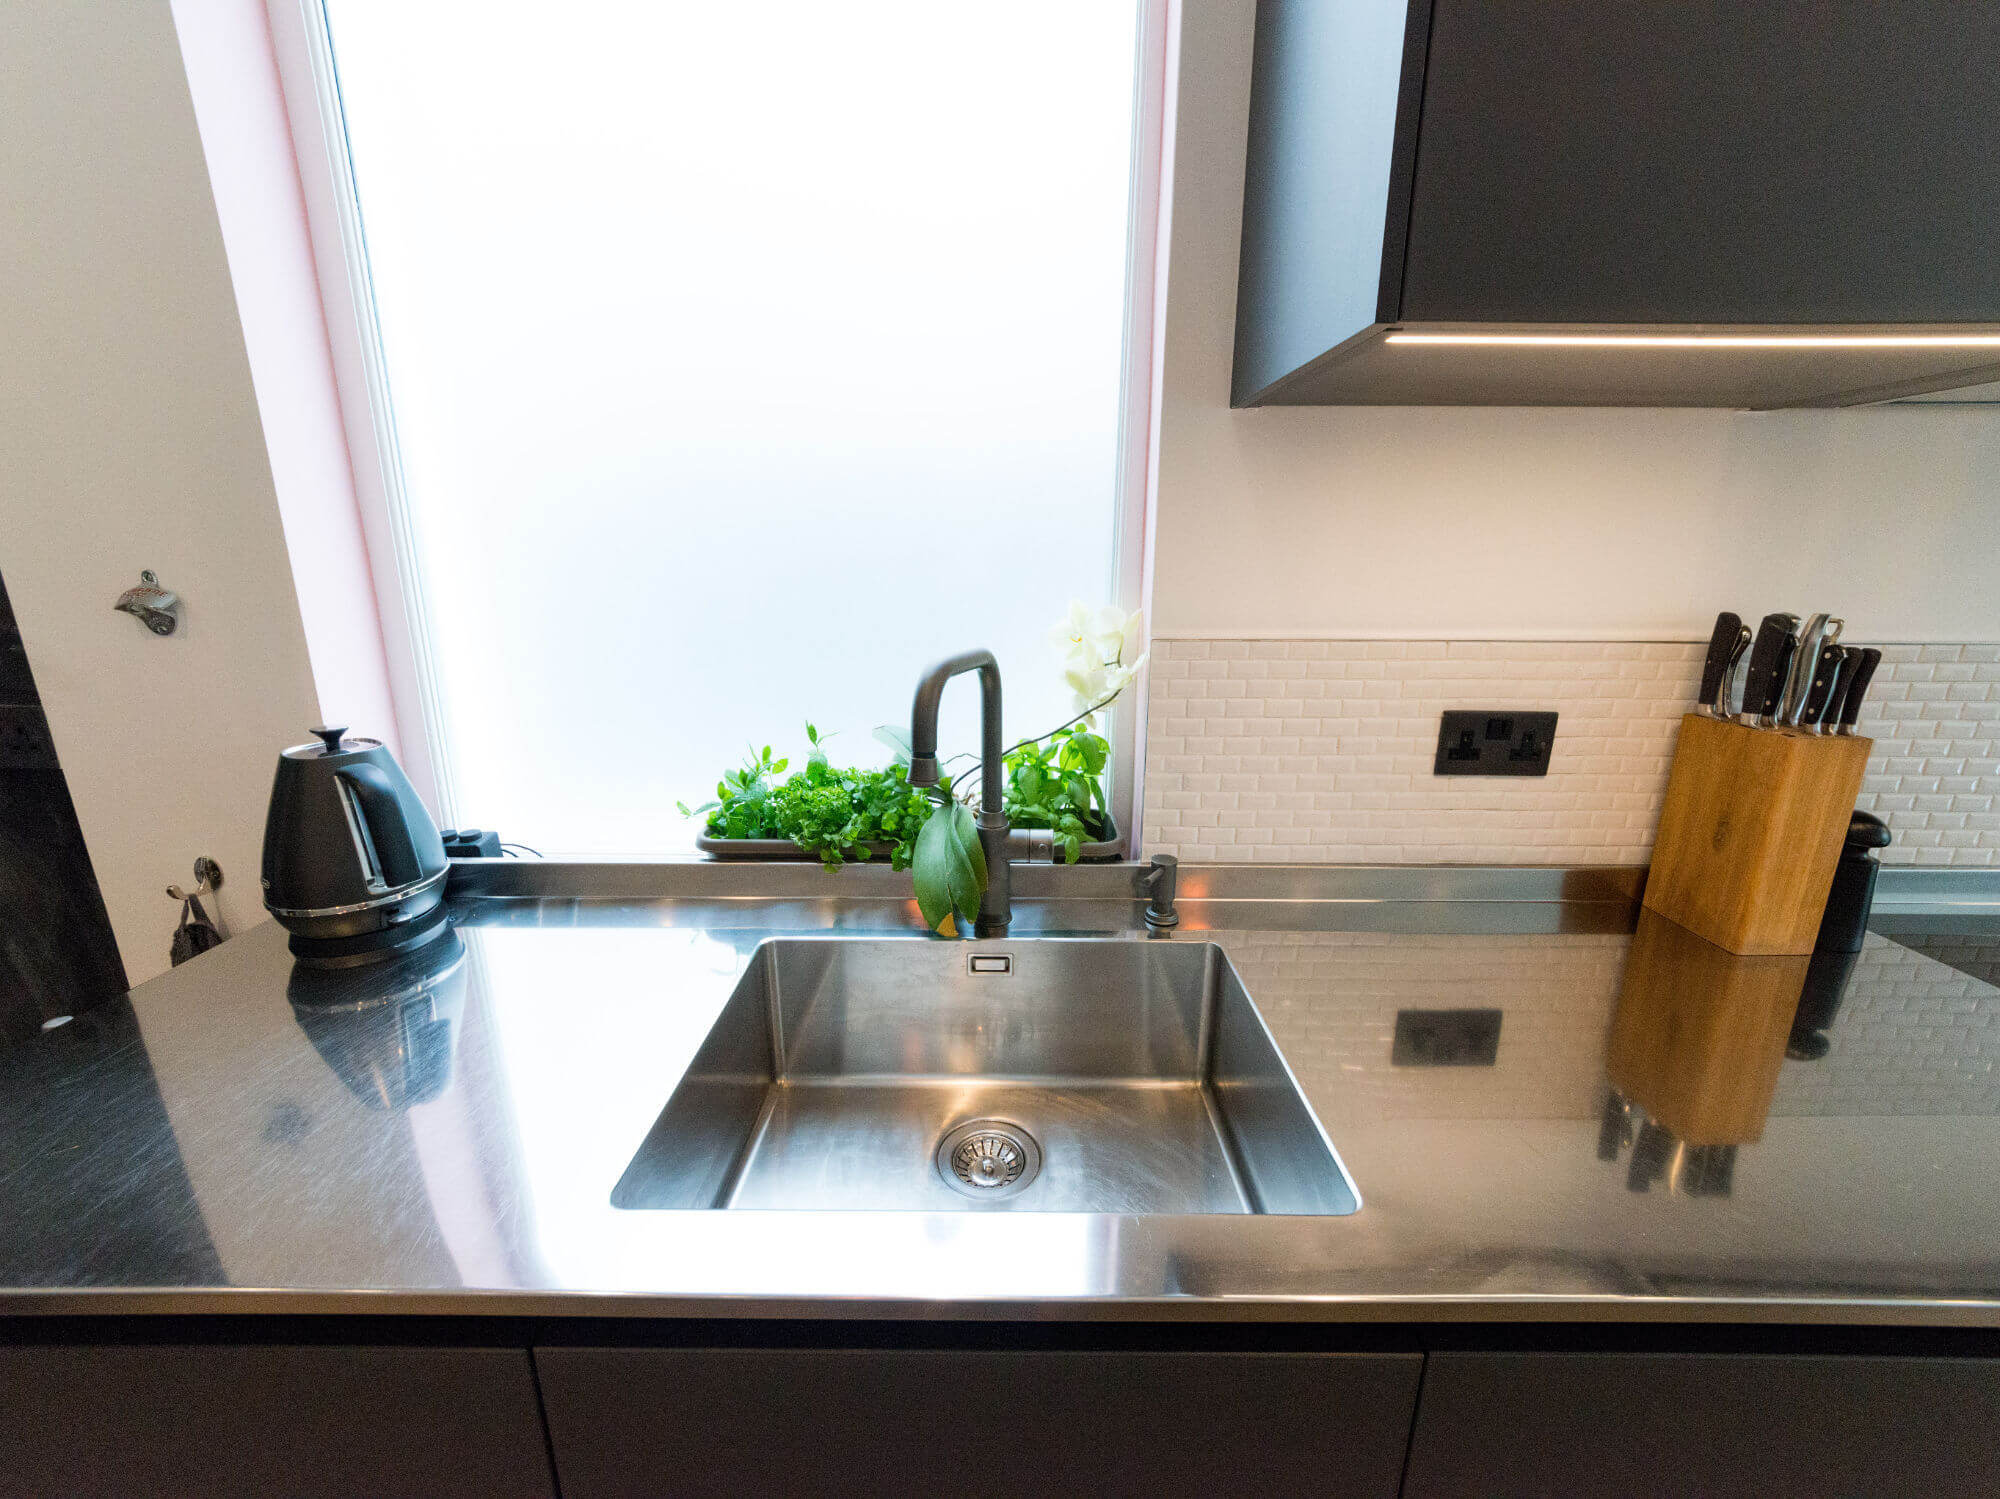 Integrated stainless steel sink